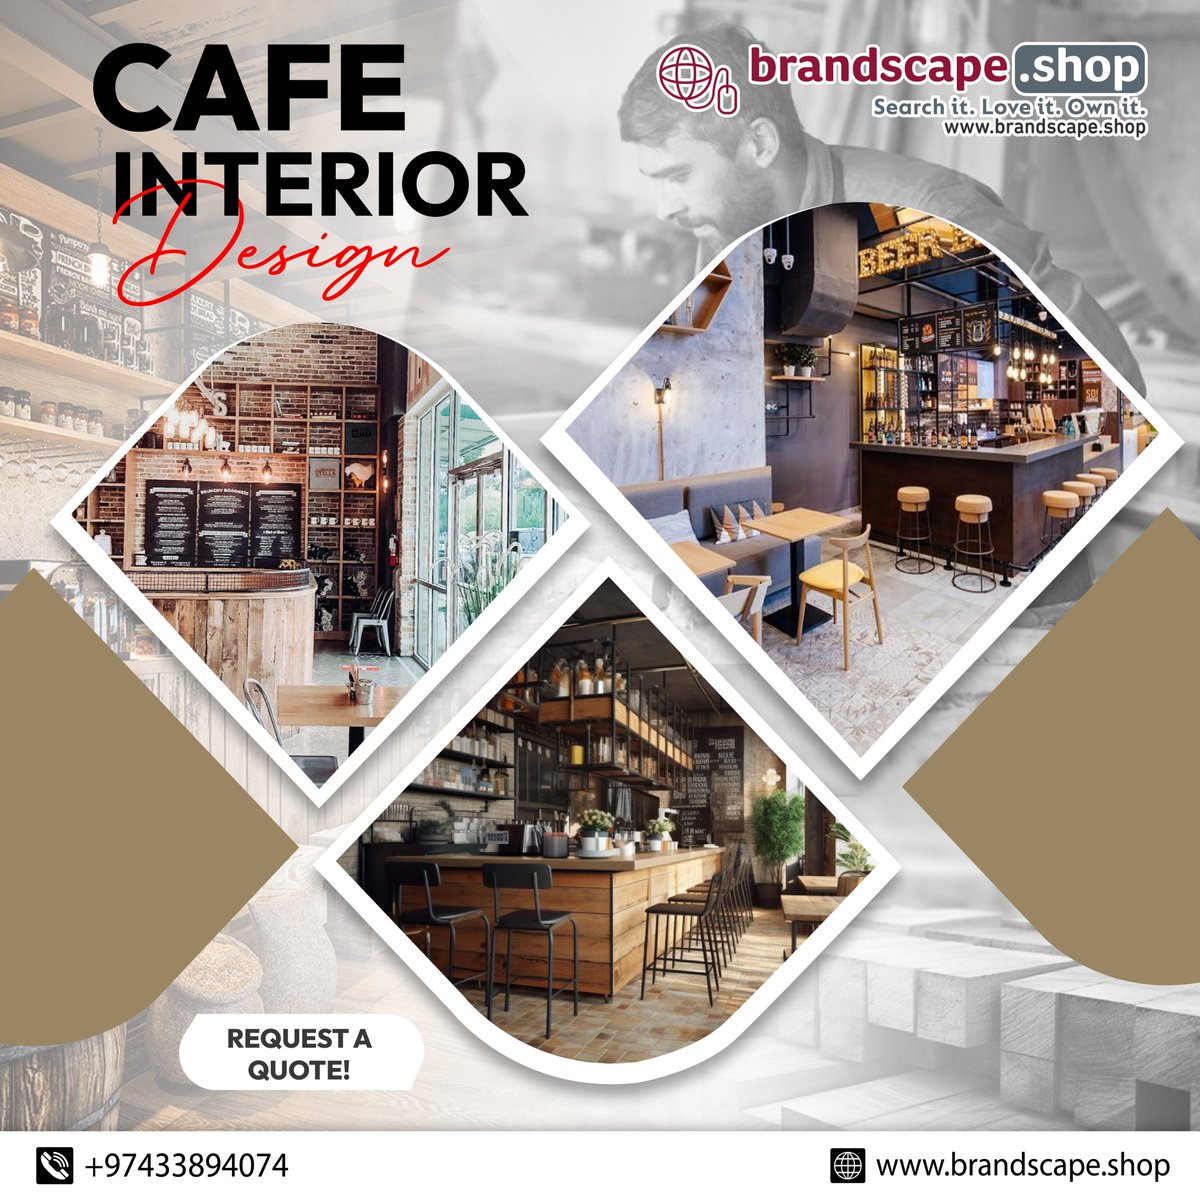 Crafting atmospheres, brewing experiences: where every sip is a stroke of inspiration.

Shop at brandscape.shop/collections/bu…

Click here for brandscape.shop/collections/bu…

For More Inquiries Contact
33894074

#cafedesign #cafeteria #interiordesigntrends #RestaurantDesign #design #qatar